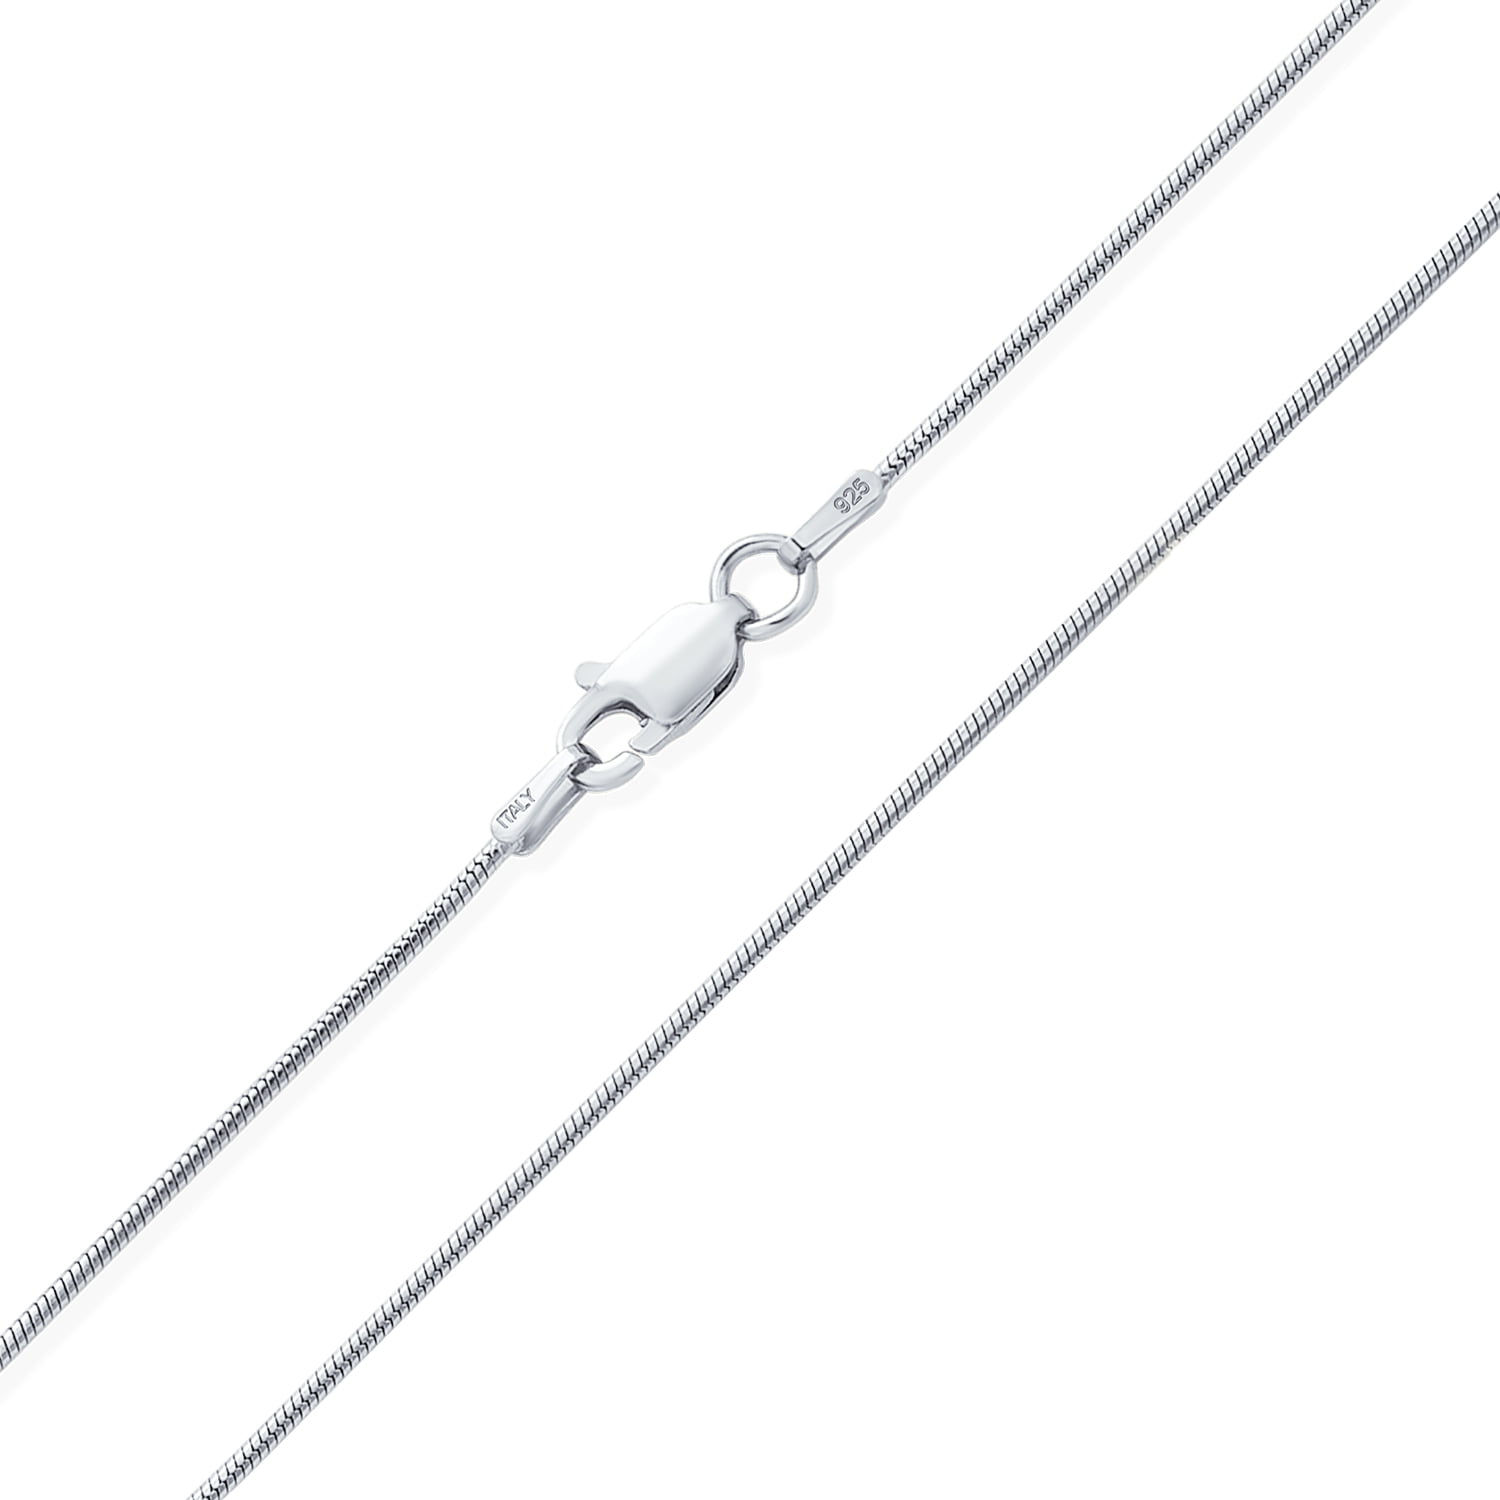 Sterling Silver Snake Chain Necklace 1.5mm (Gauge 040). Available in 6 Lengths.